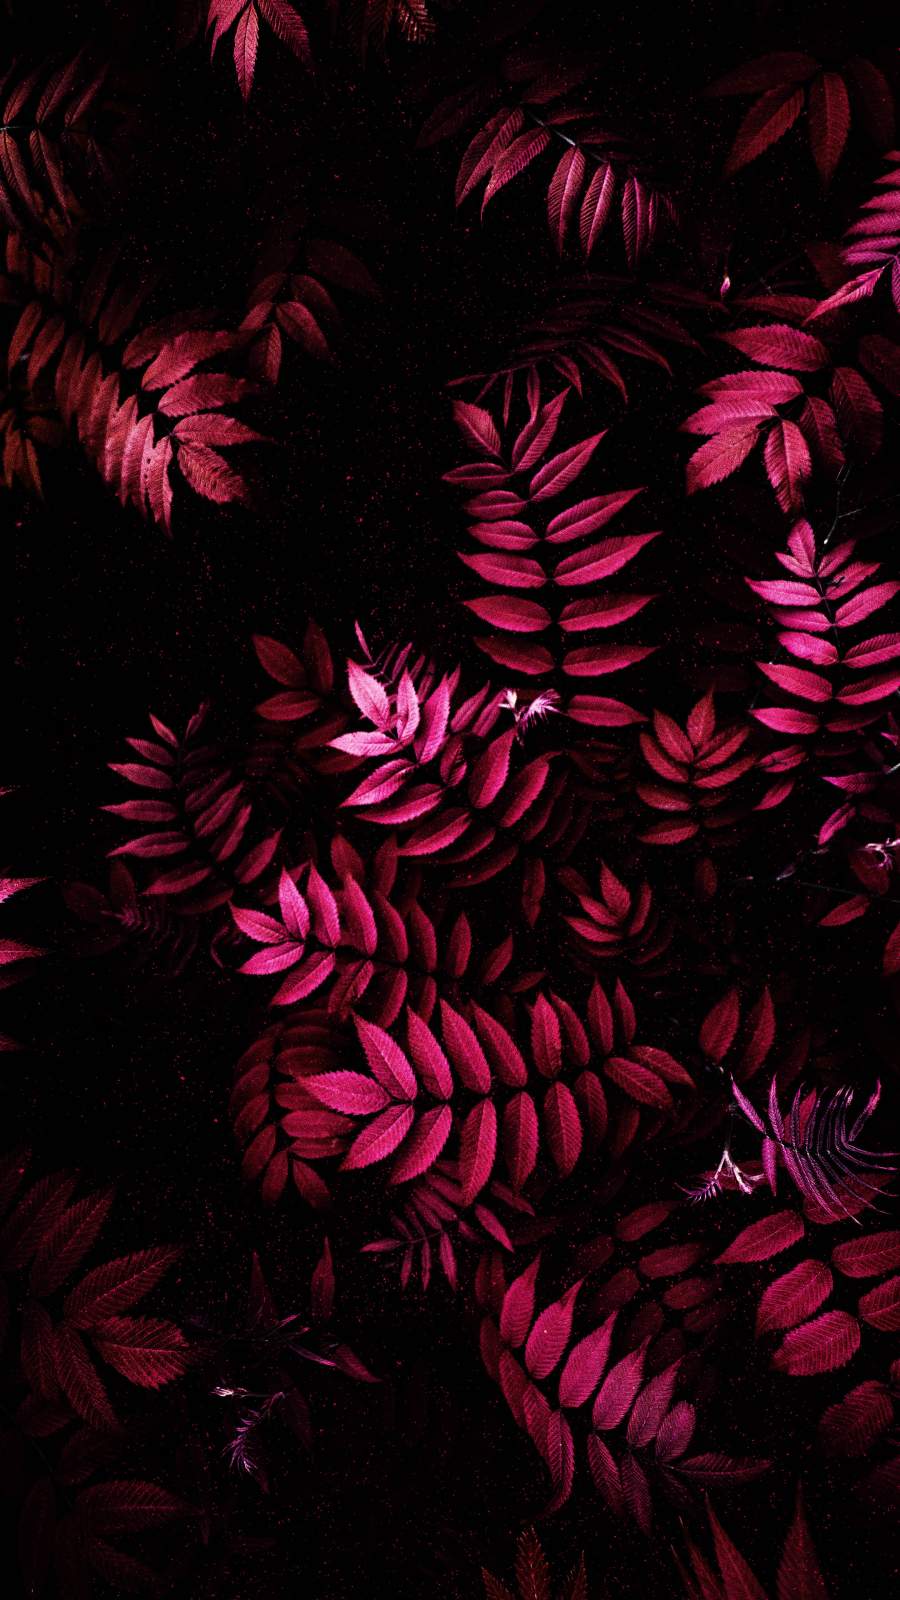 Pink Iphone Wallpapers